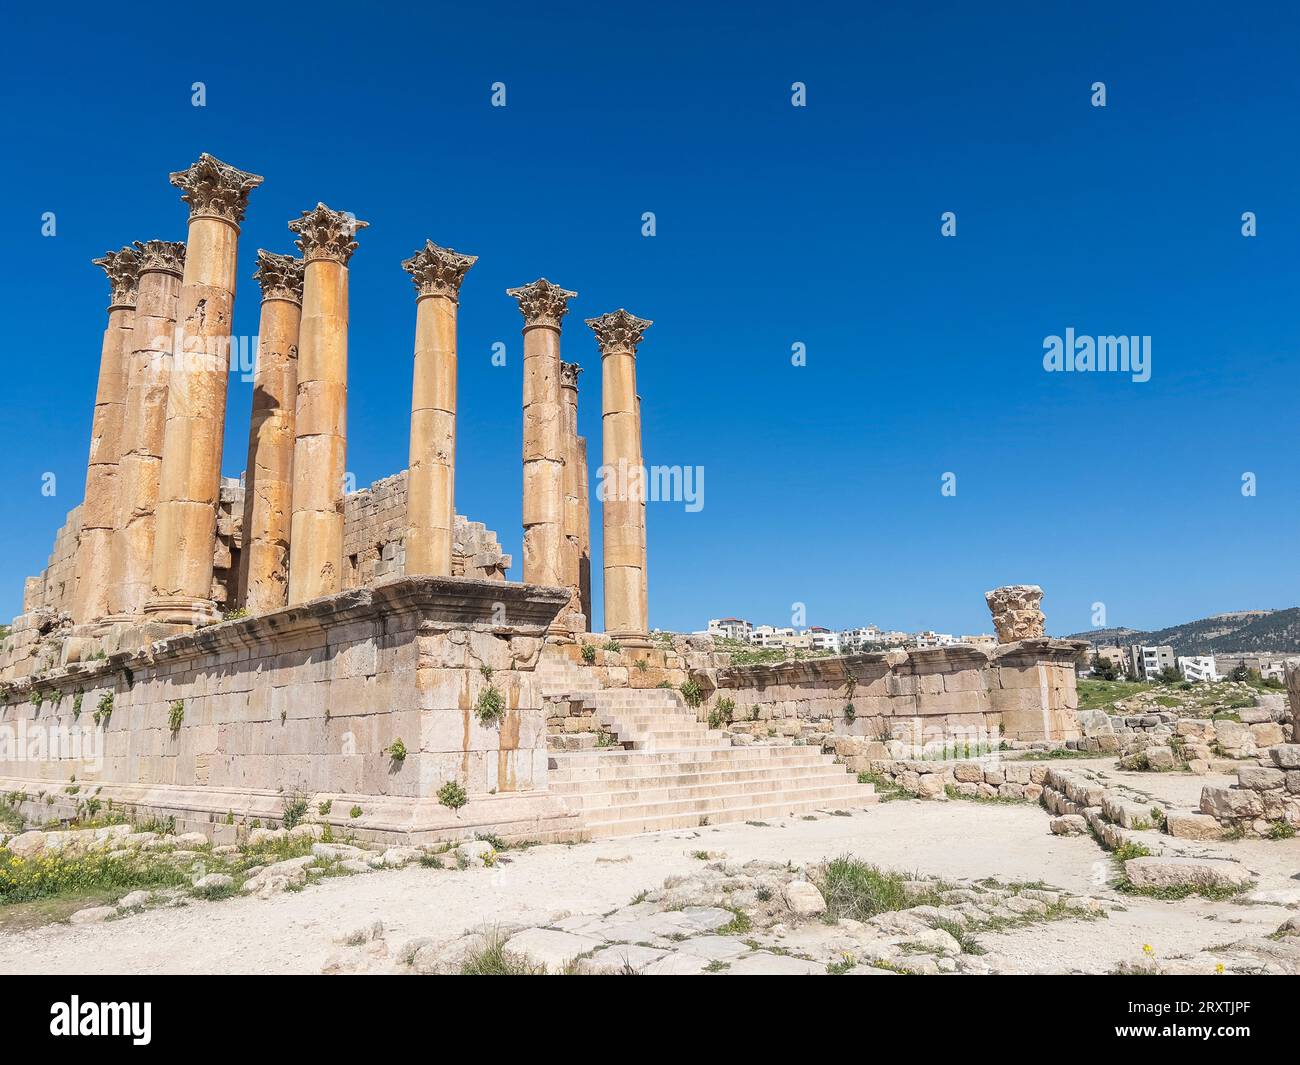 Columns frame a building in the ancient city of Jerash, believed to be founded in 331 BC by Alexander the Great, Jerash, Jordan, Middle East Stock Photo